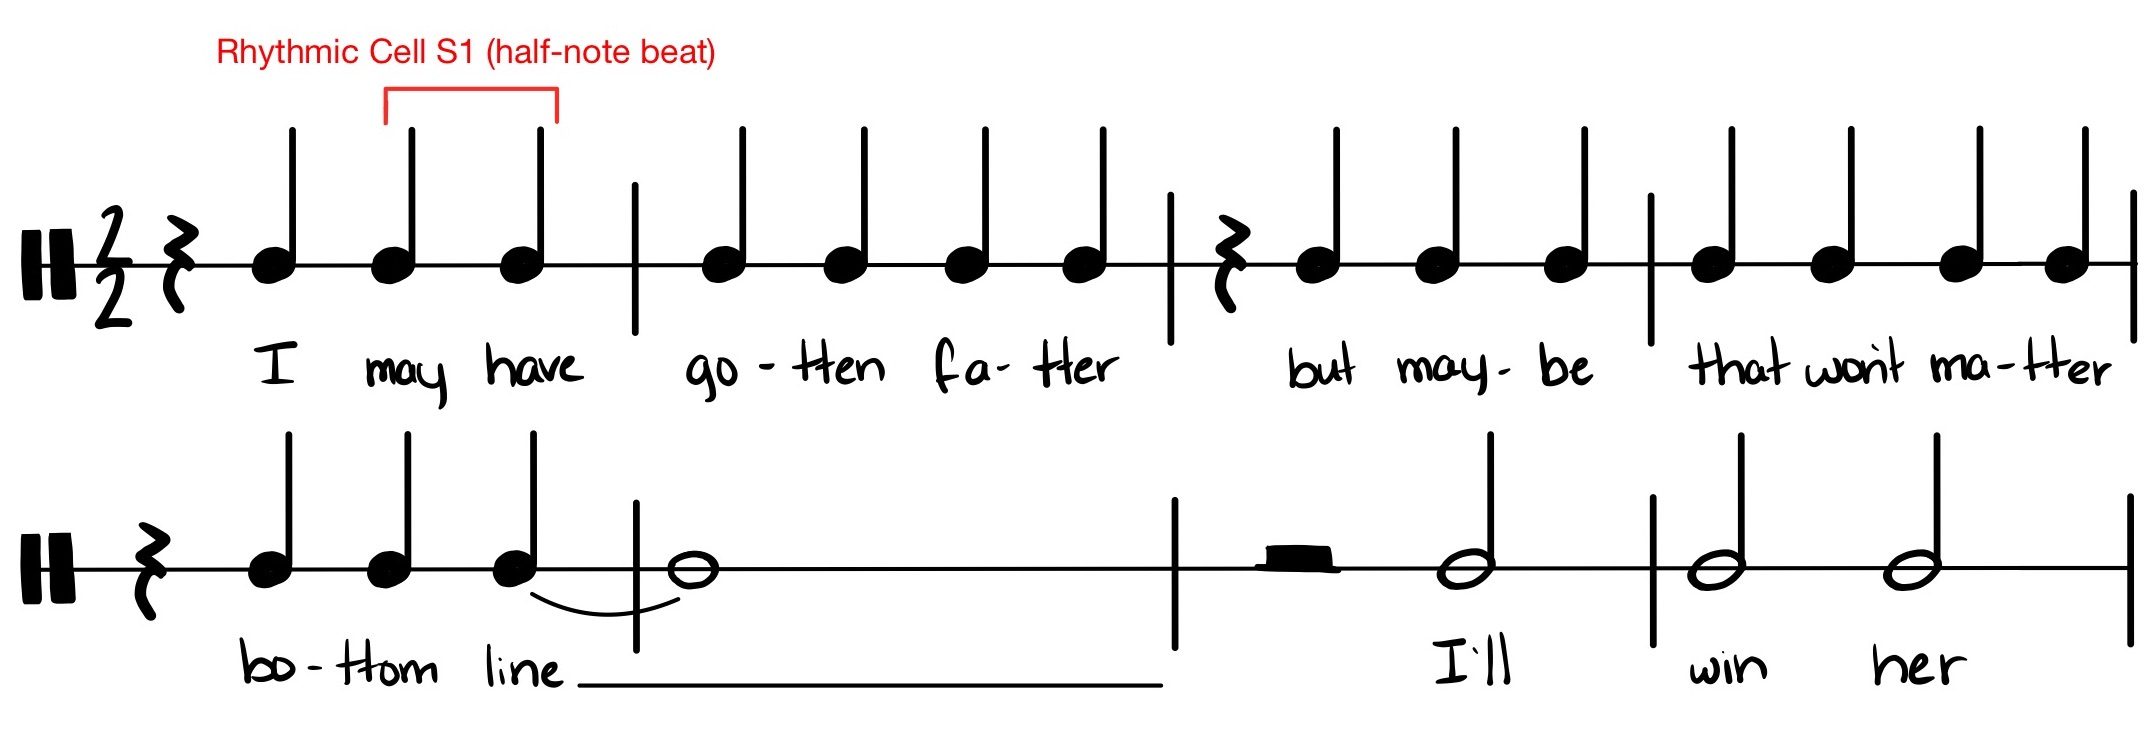 Traditional staff notation on a one-line percussion staff for the rhythms of 0:08–0:16 from the melody of the song “We’ll Go From There.” The notation is in “two-two” meter. The notes are all written on the single line of the staff, without regard to changing pitch. Rhythmic cell S1 from the chapter on Rhythm Skills (two quarter notes in two-two meter) is bracketed and labelled. The lyrics are written below the noteheads.